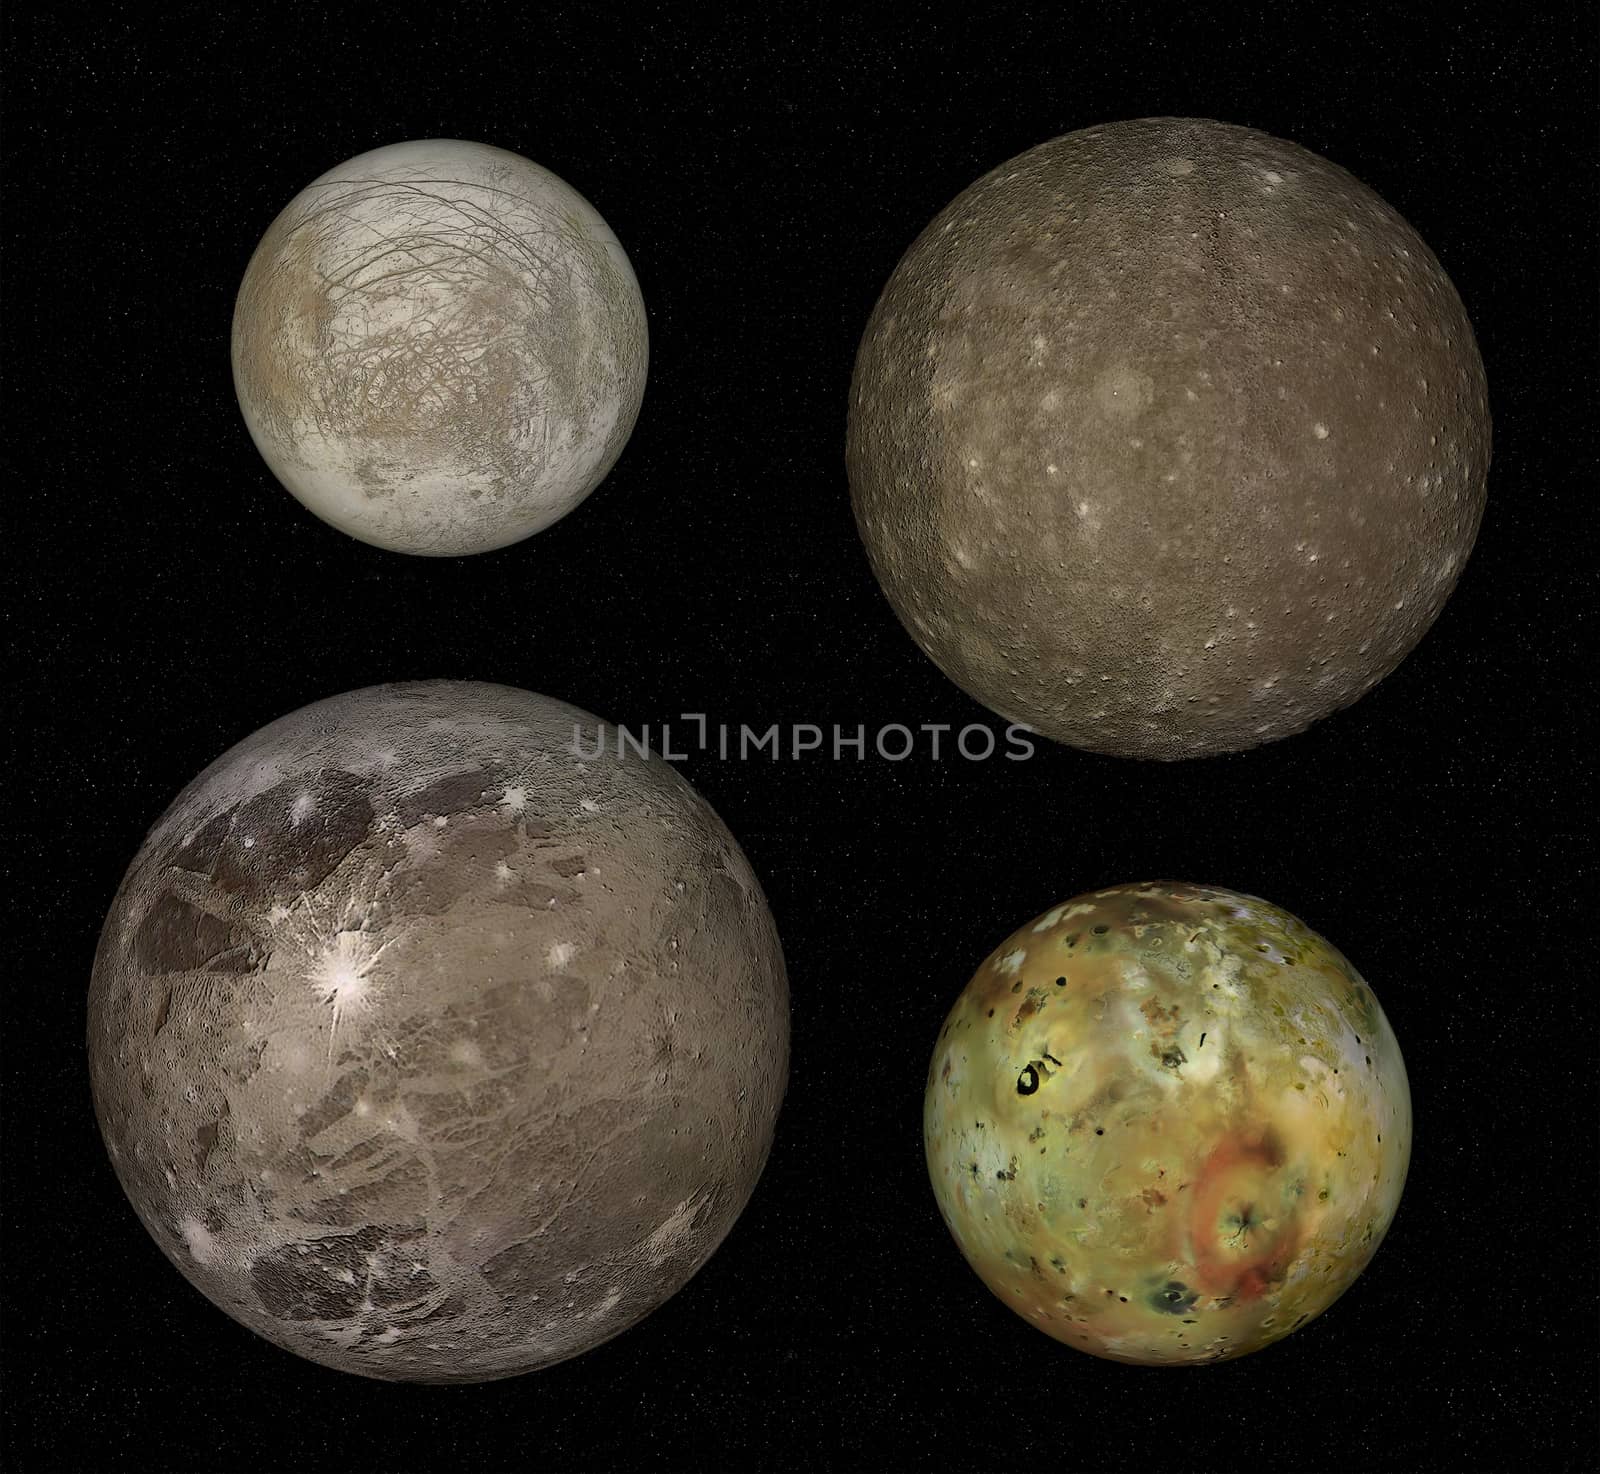 Jupiter and four biggest moons: Io, Europa, Callisto and Ganymede